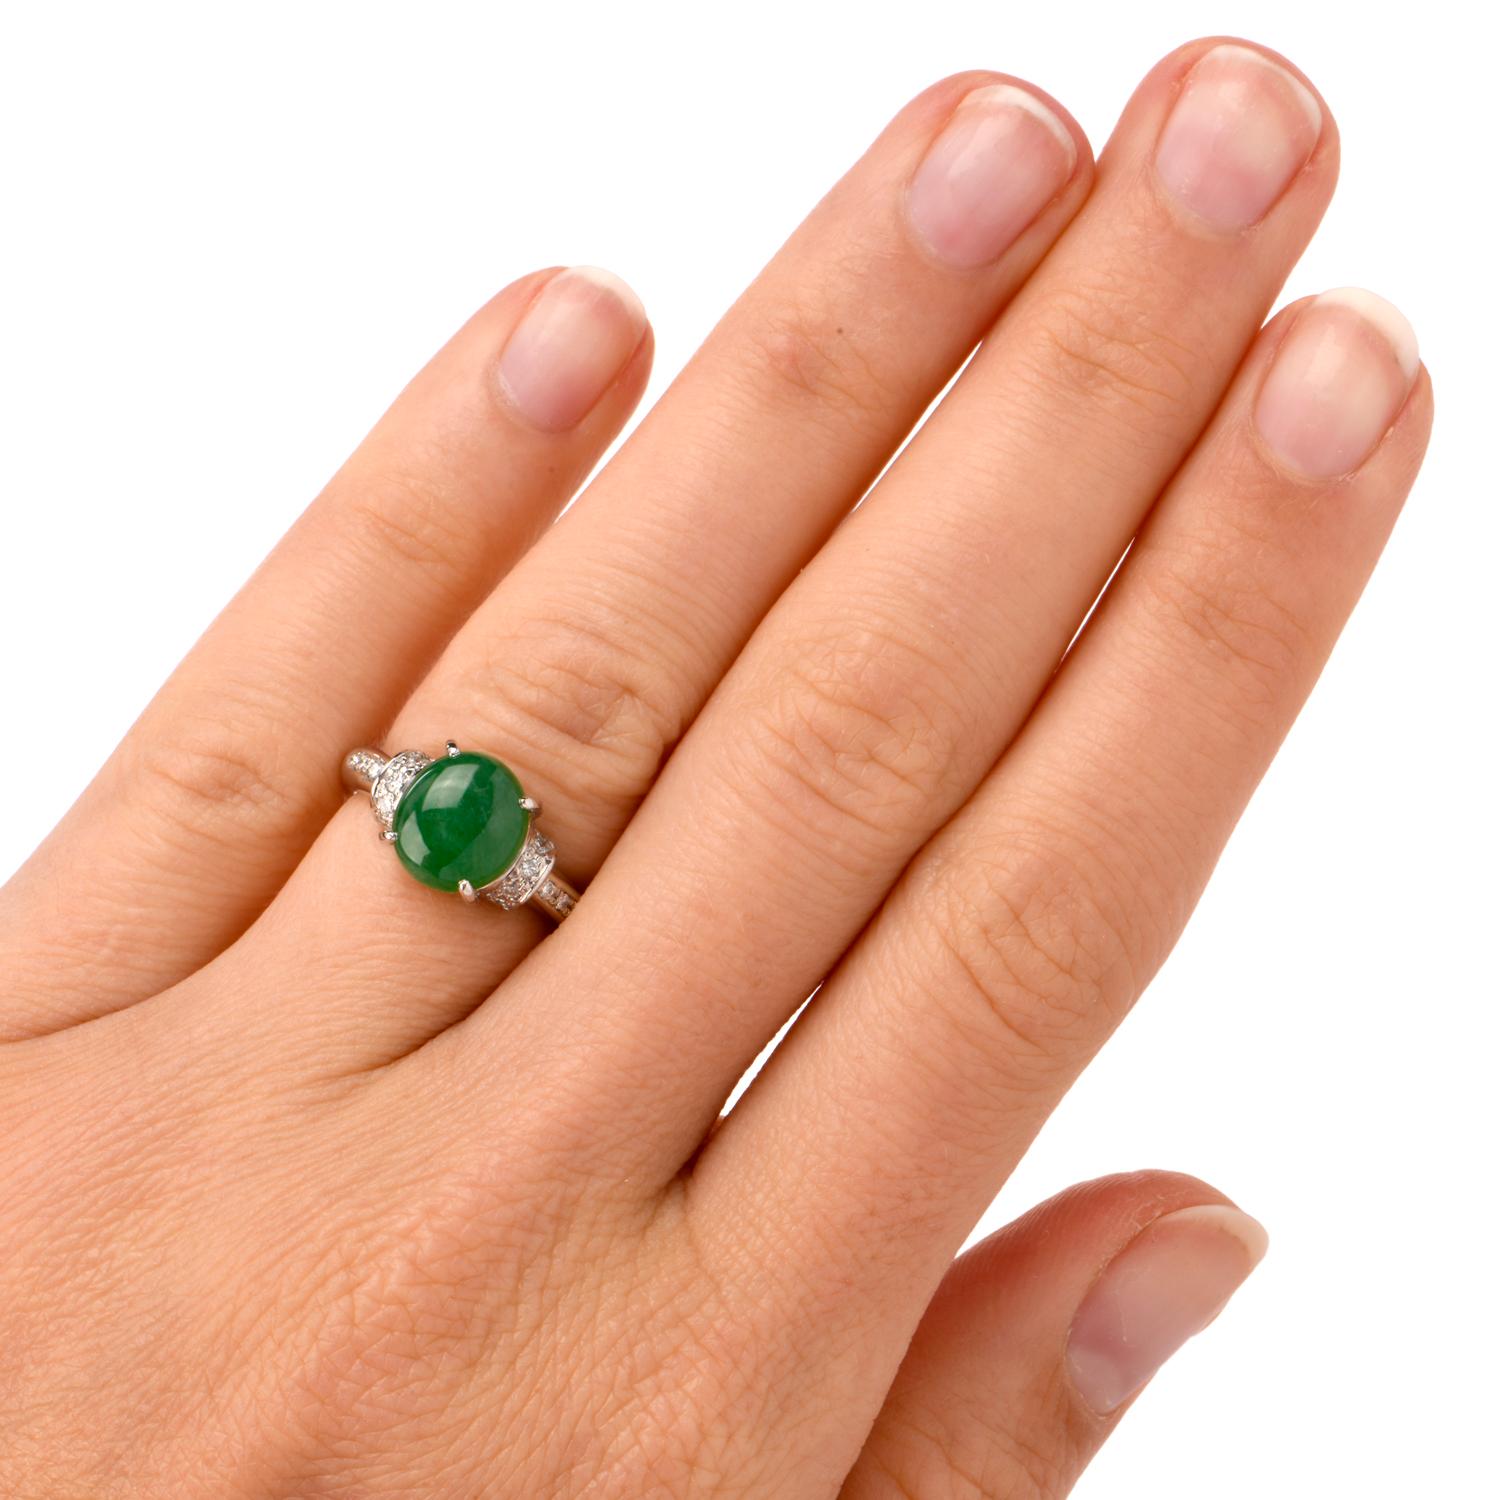 This alluring all natural jade without any treatments and diamond ring is crafted in solid platinum, weighing 7.0 grams and measuring 9mm wide x 9mm high. Centered with one GIA lab reported paw-prong-set oval shaped genuine jadeite jade cabochon,